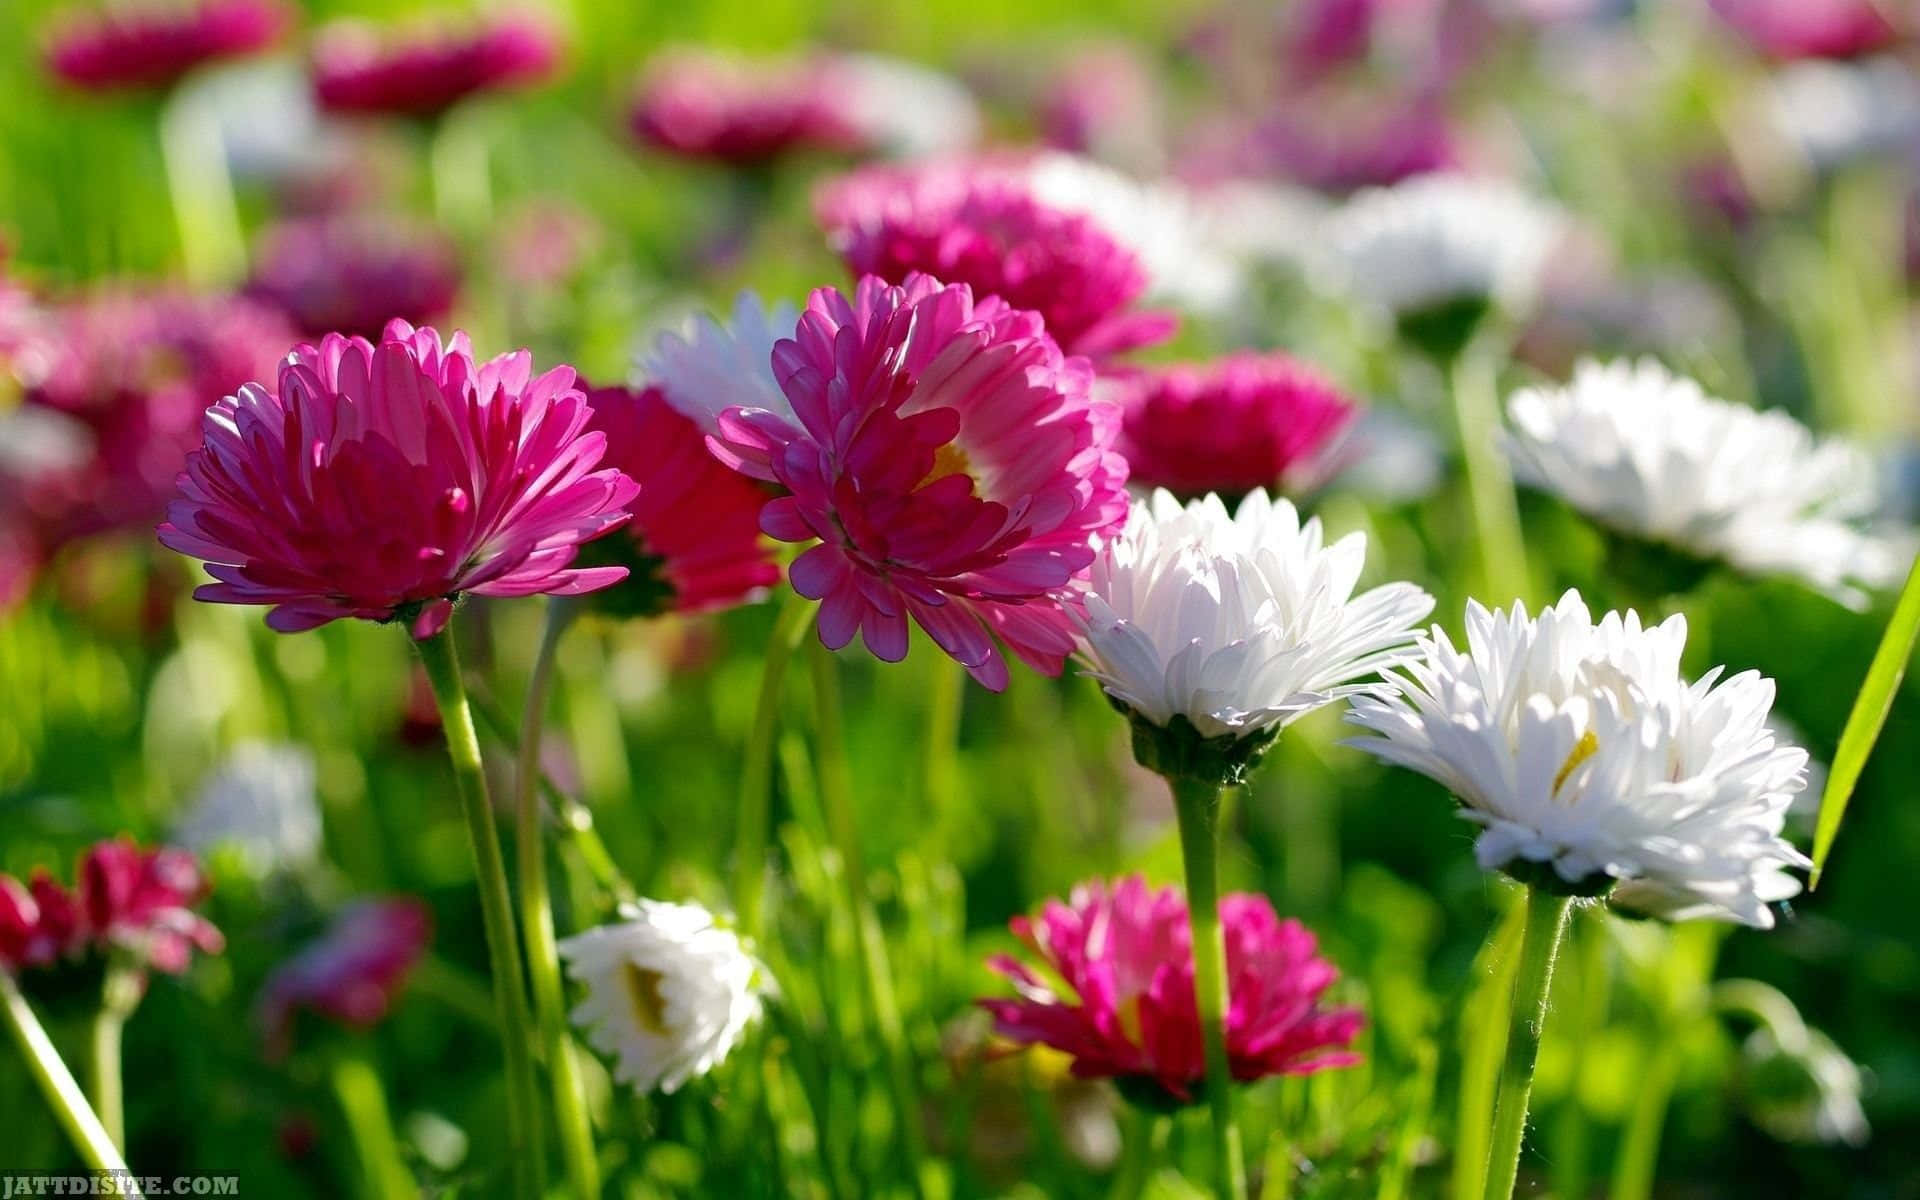 a field of pink and white flowers in the grass